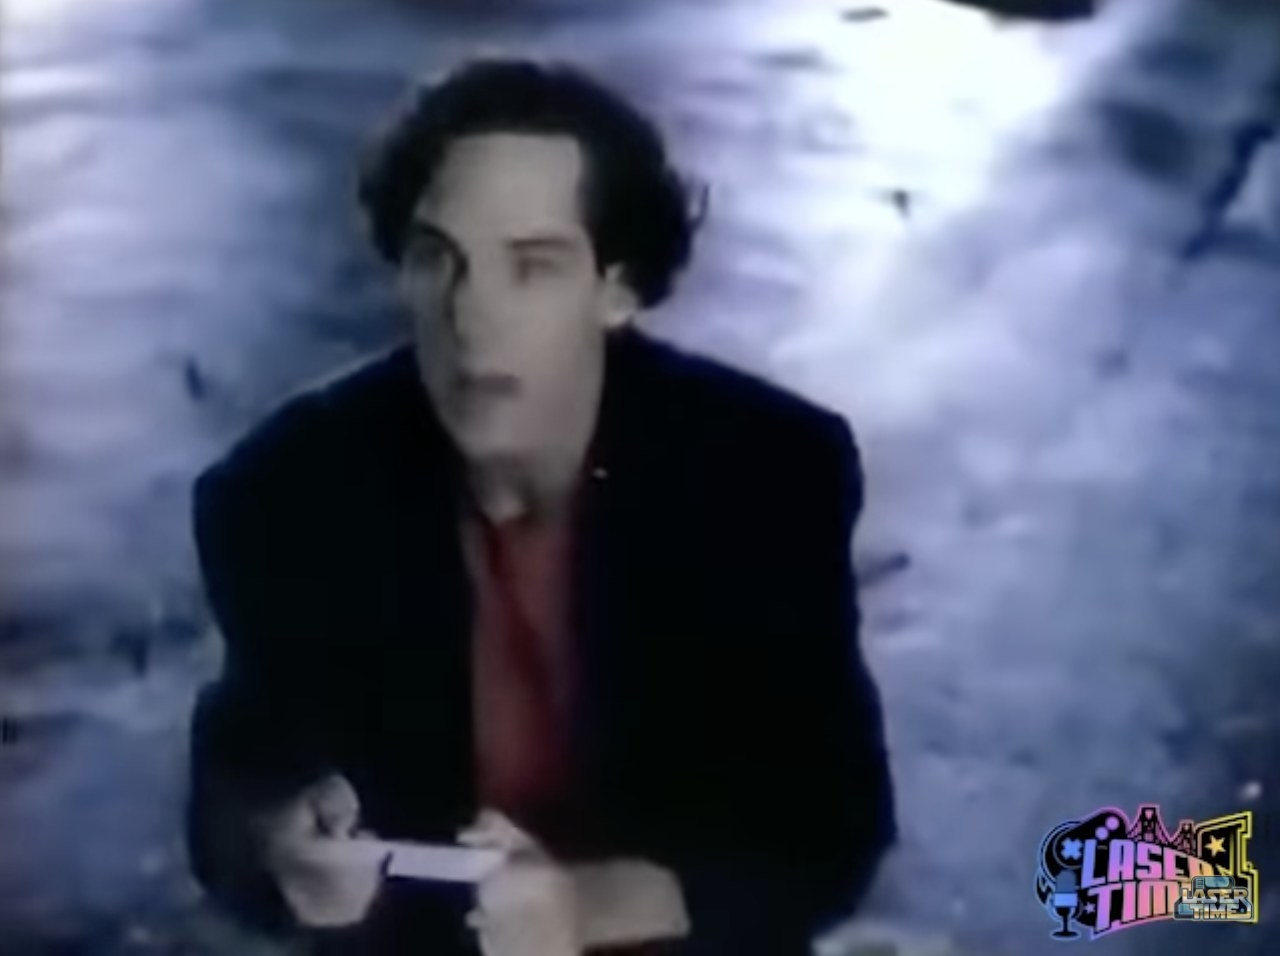 Paul Rudd playing the Super Nintendo in a commercial